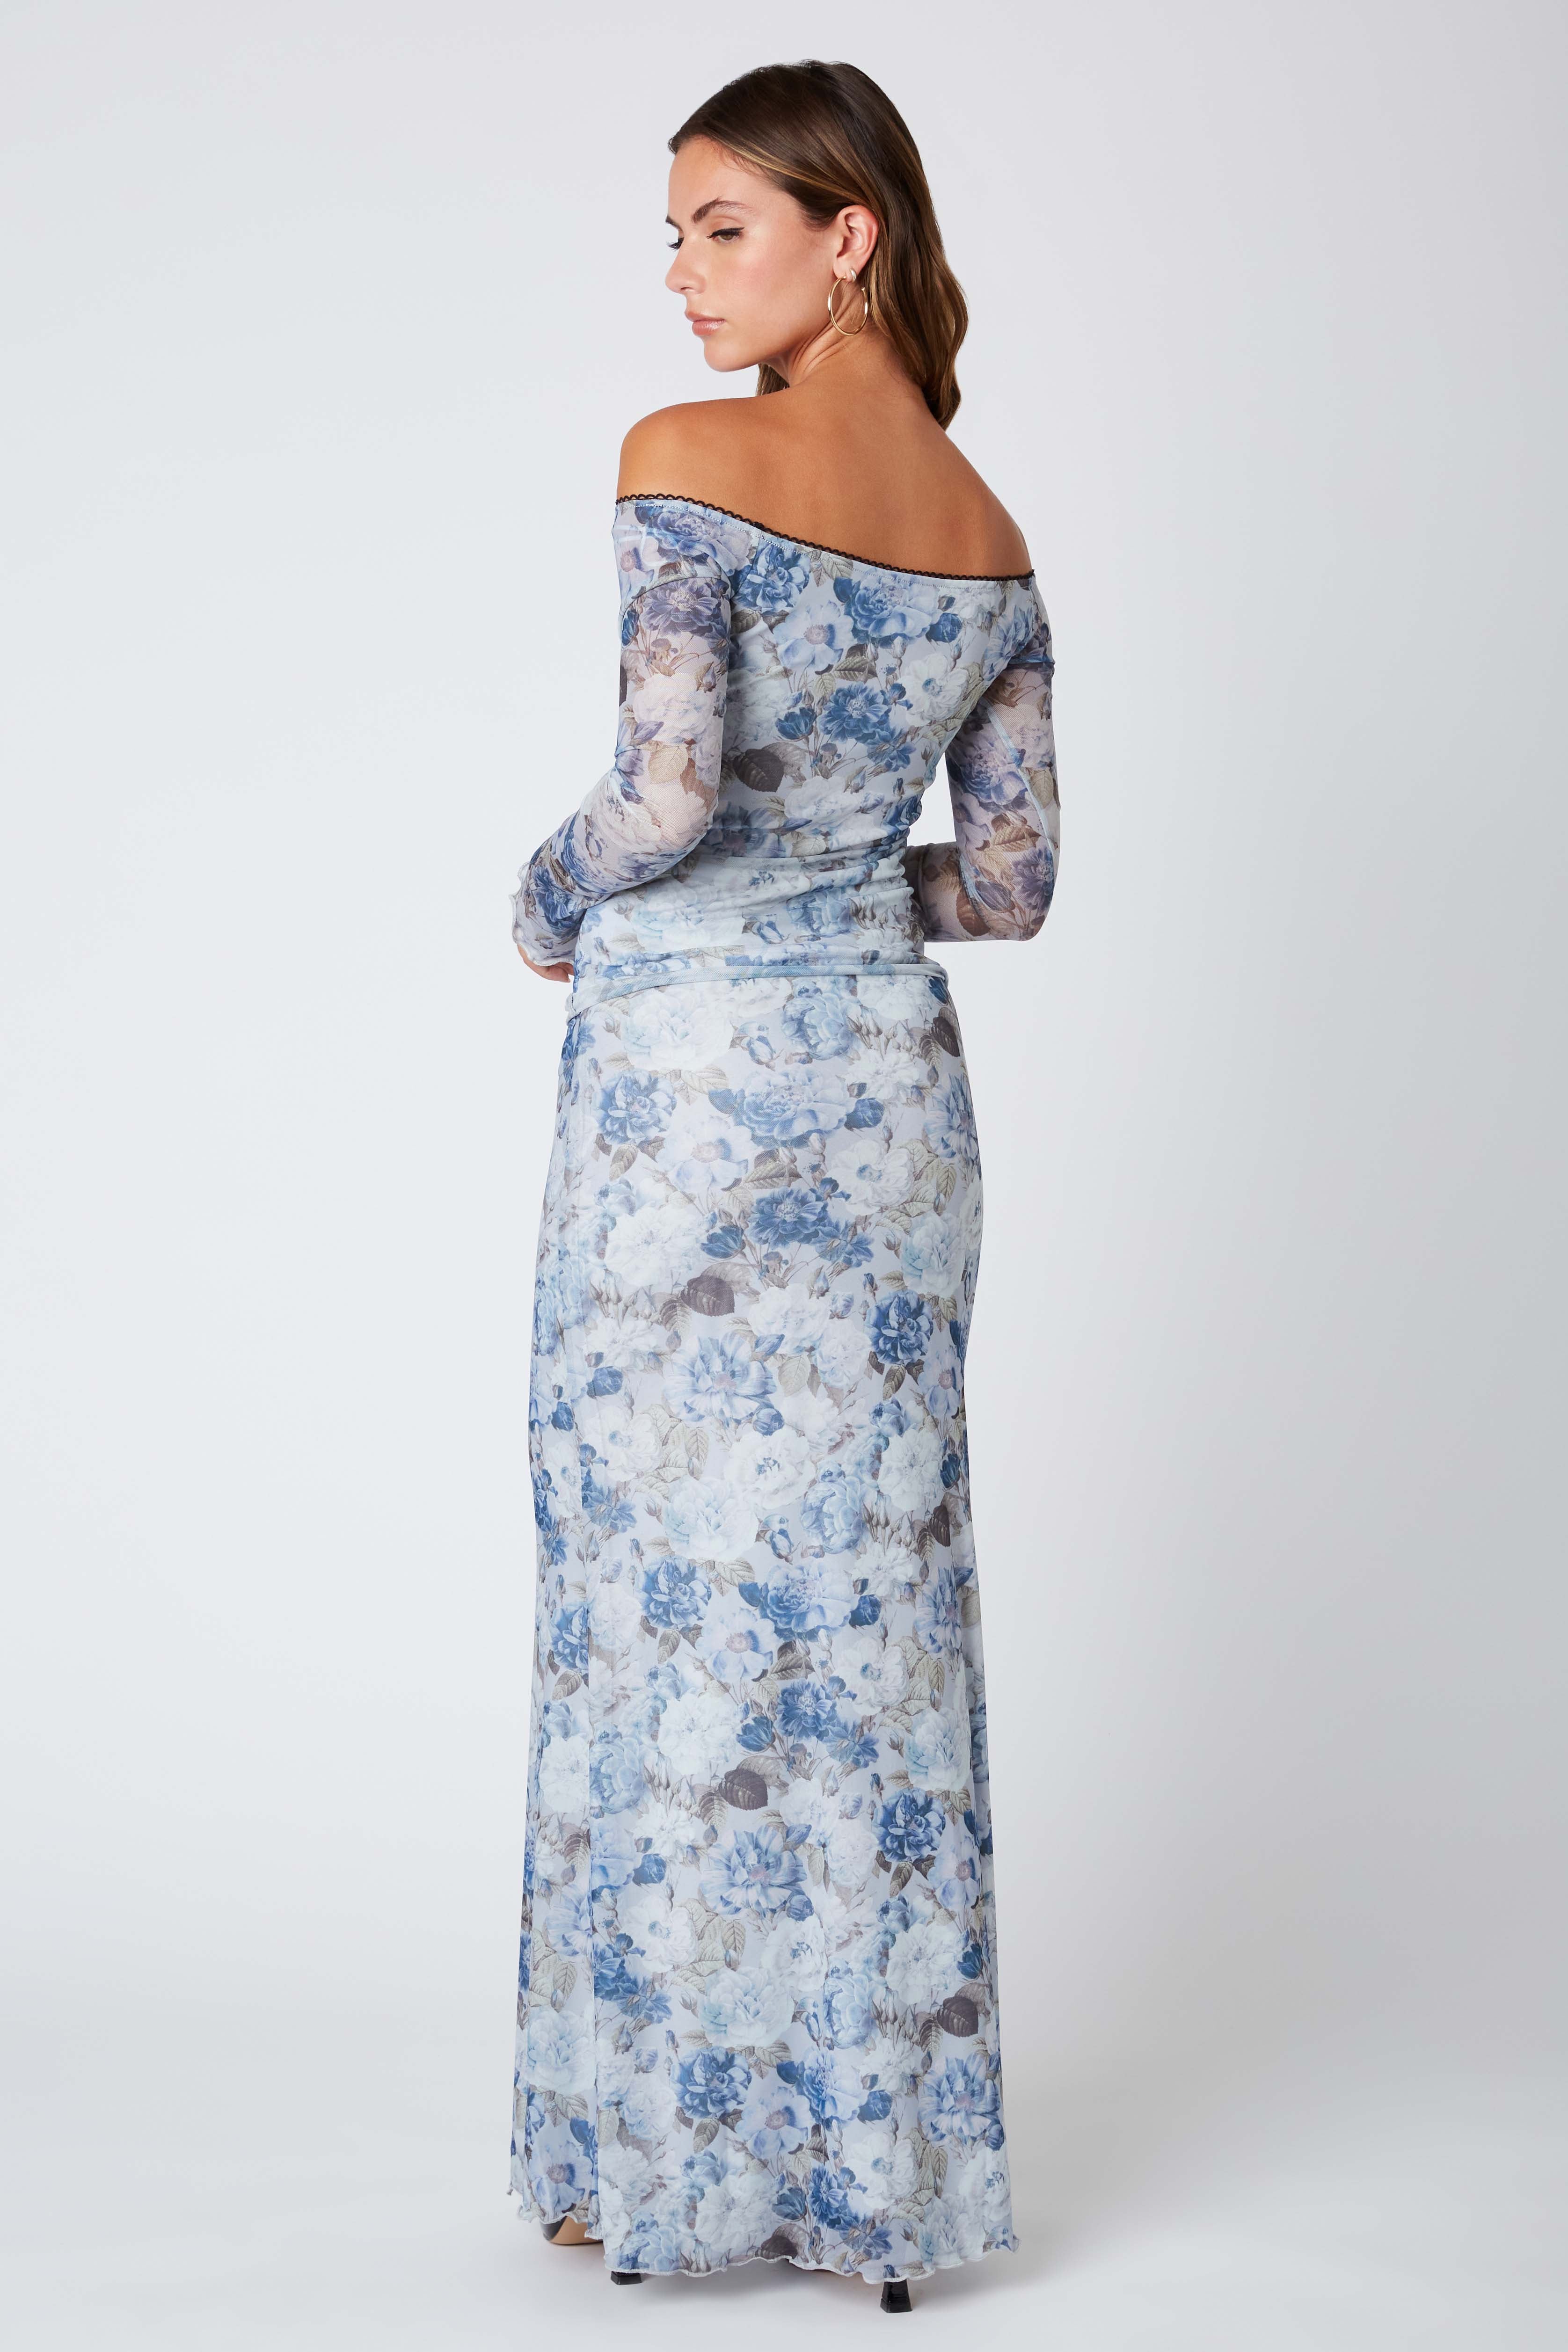 Floral Micro Mesh Maxi Skirt in Blue Back View